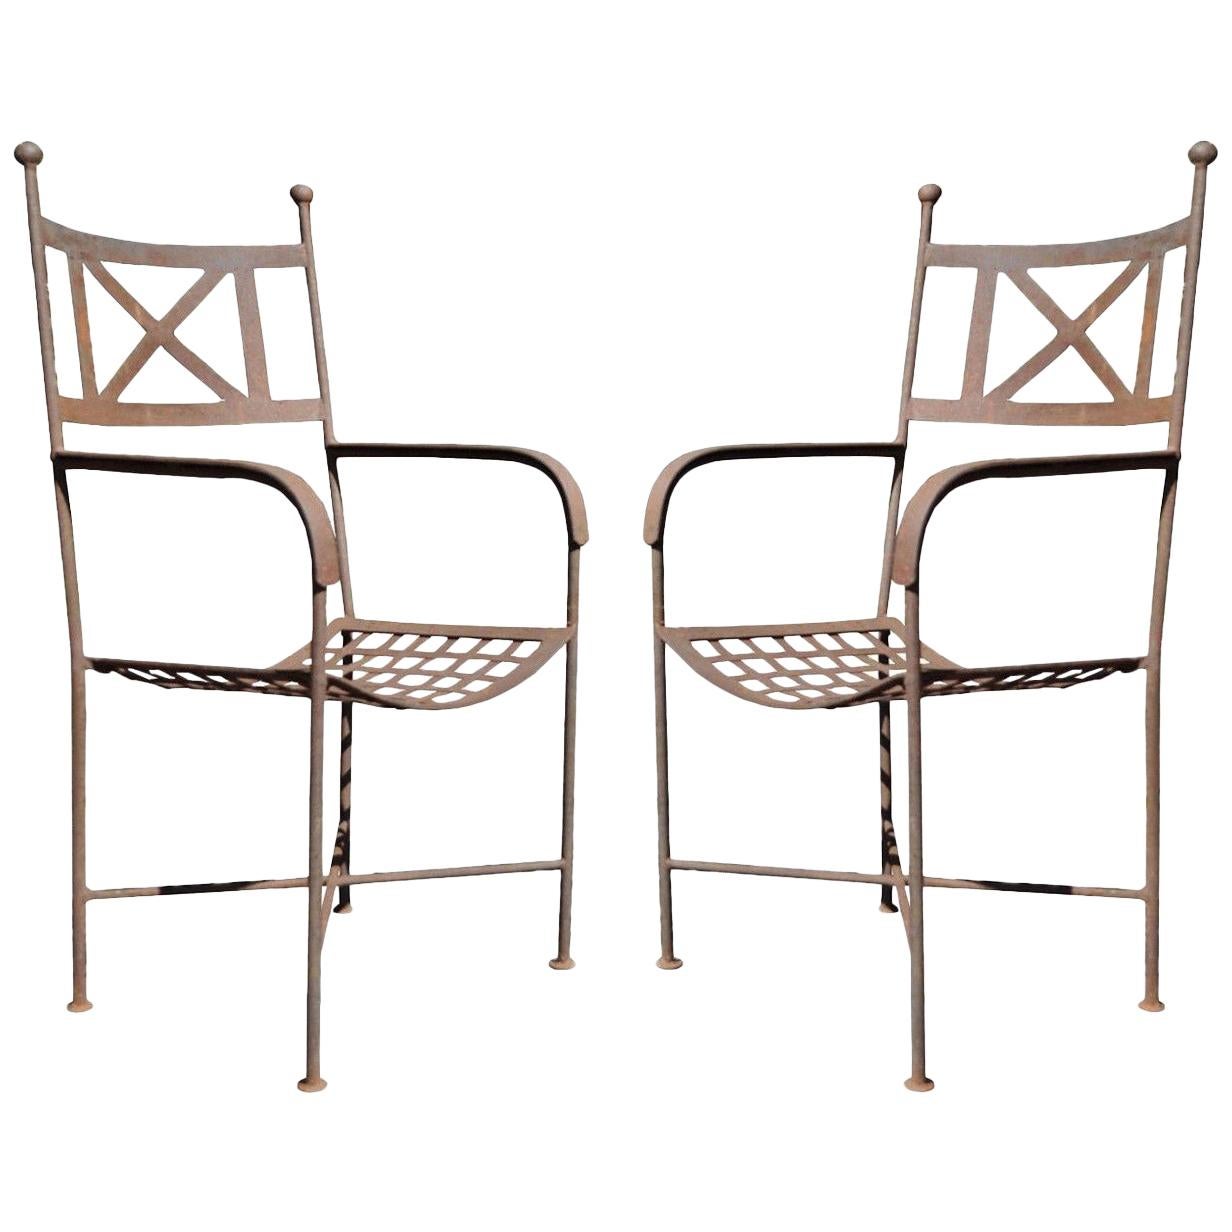 Vintage Neoclassical Regency Style Iron X-Form Stretcher Garden Armchairs, Pair For Sale